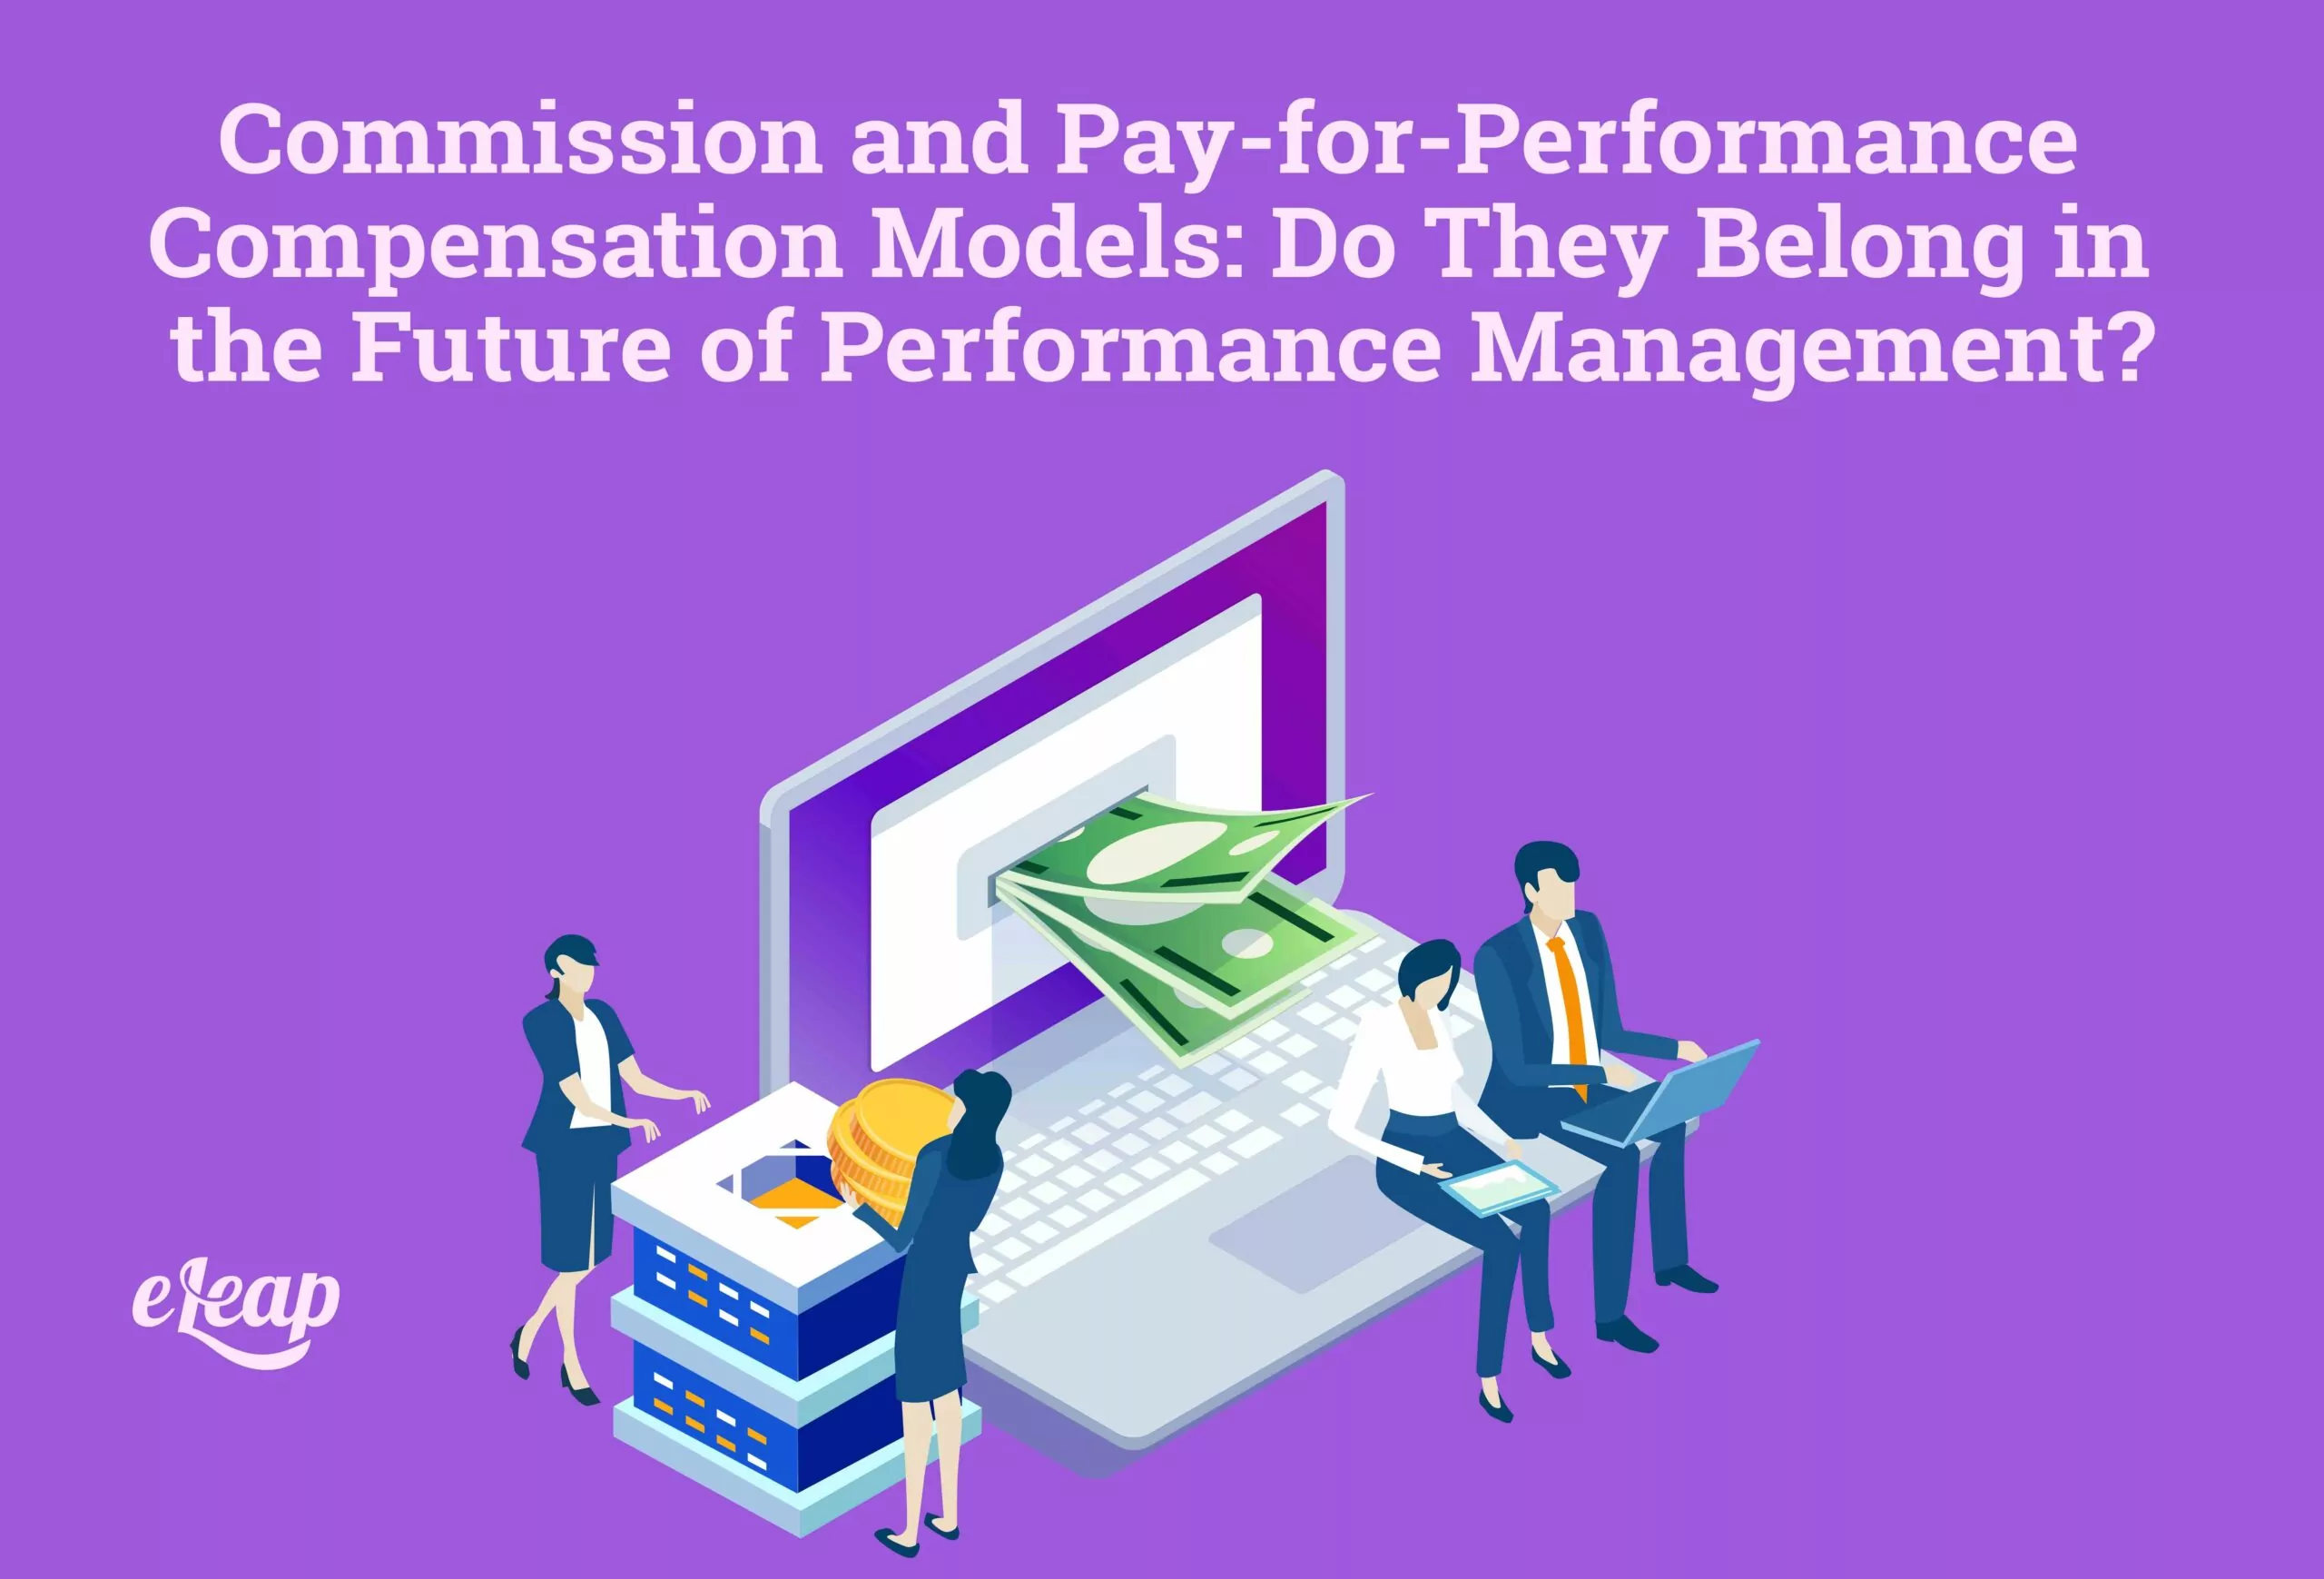 Commission and Pay-for-Performance Compensation Models: Do They Belong in the Future of Performance Management?